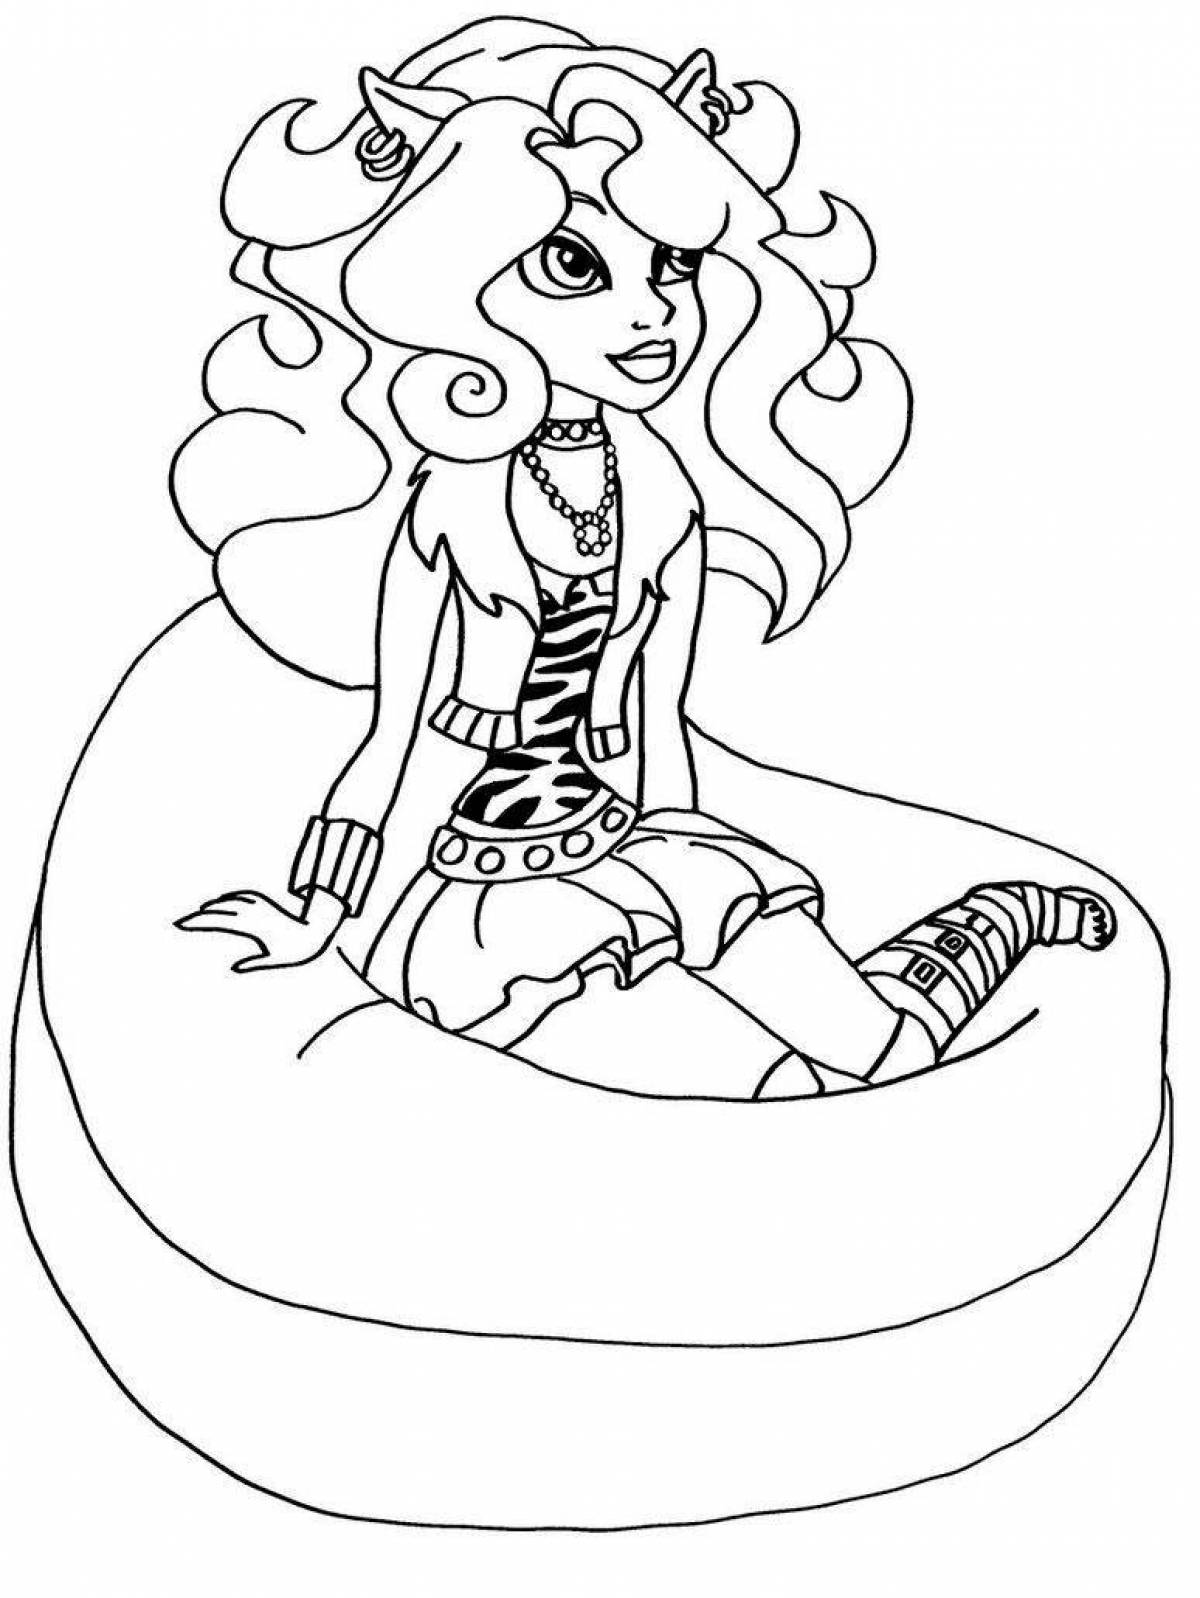 Fairy boxy boo monster coloring page